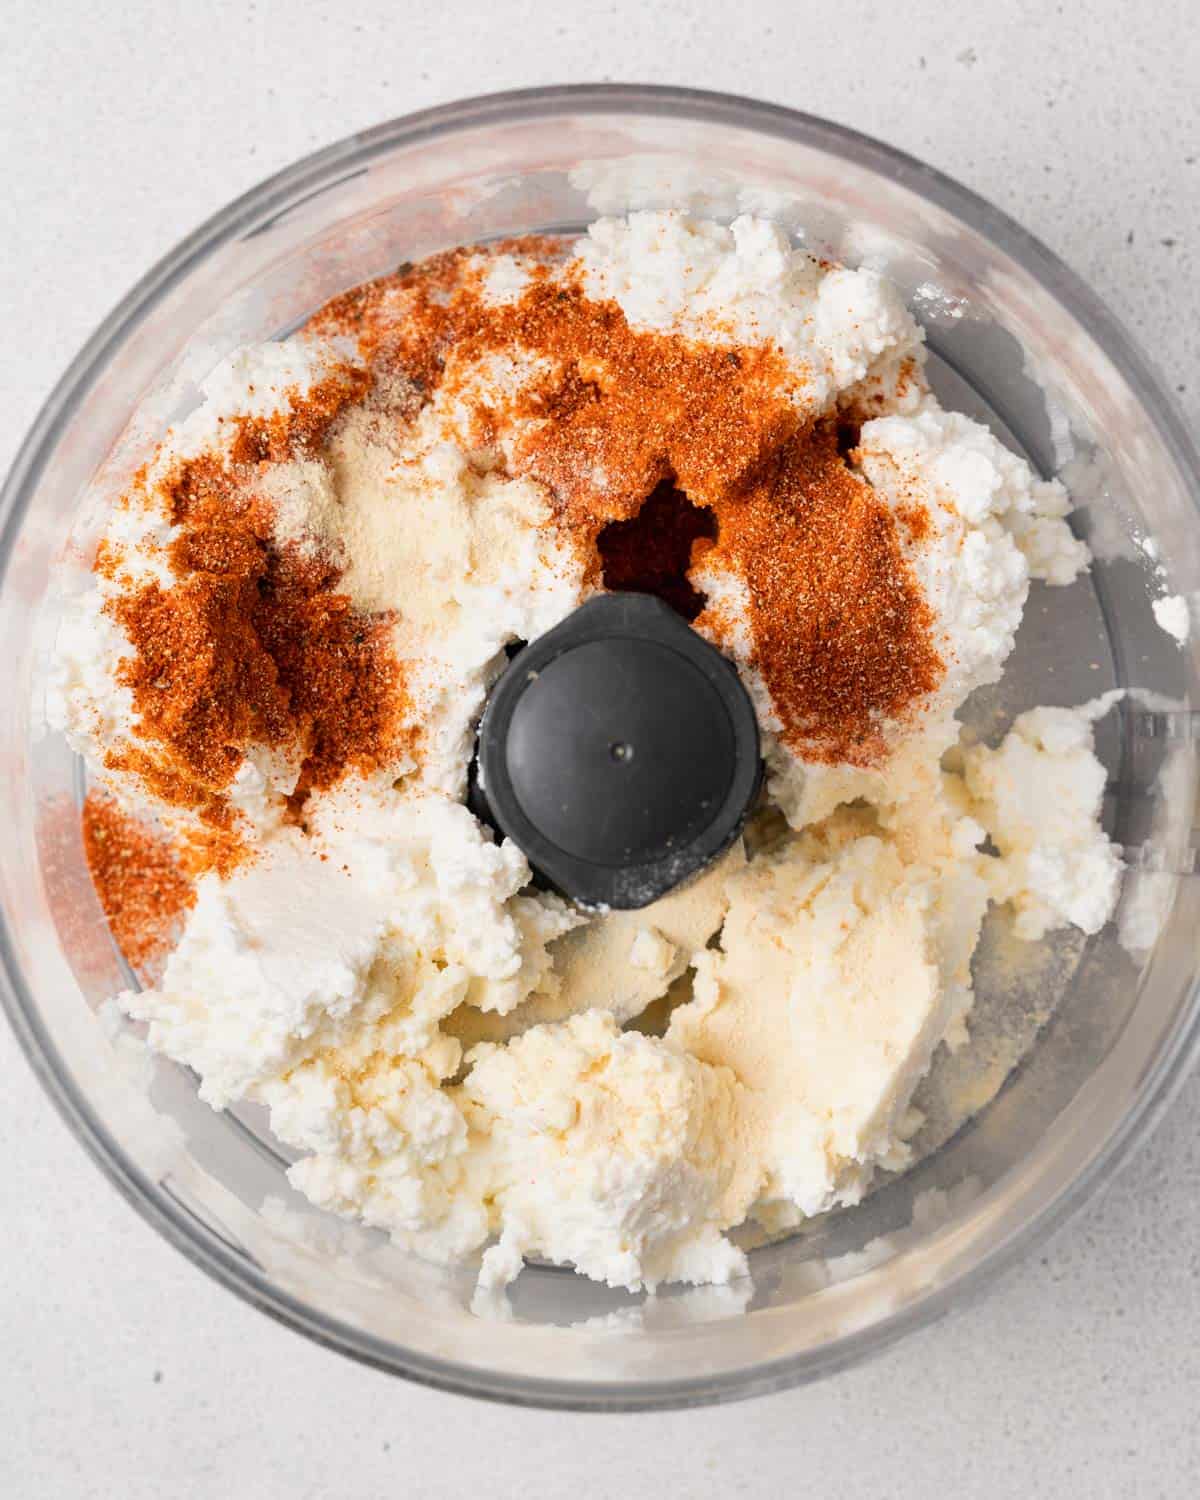 Cottage cheese in a food processor with seasonings on top.